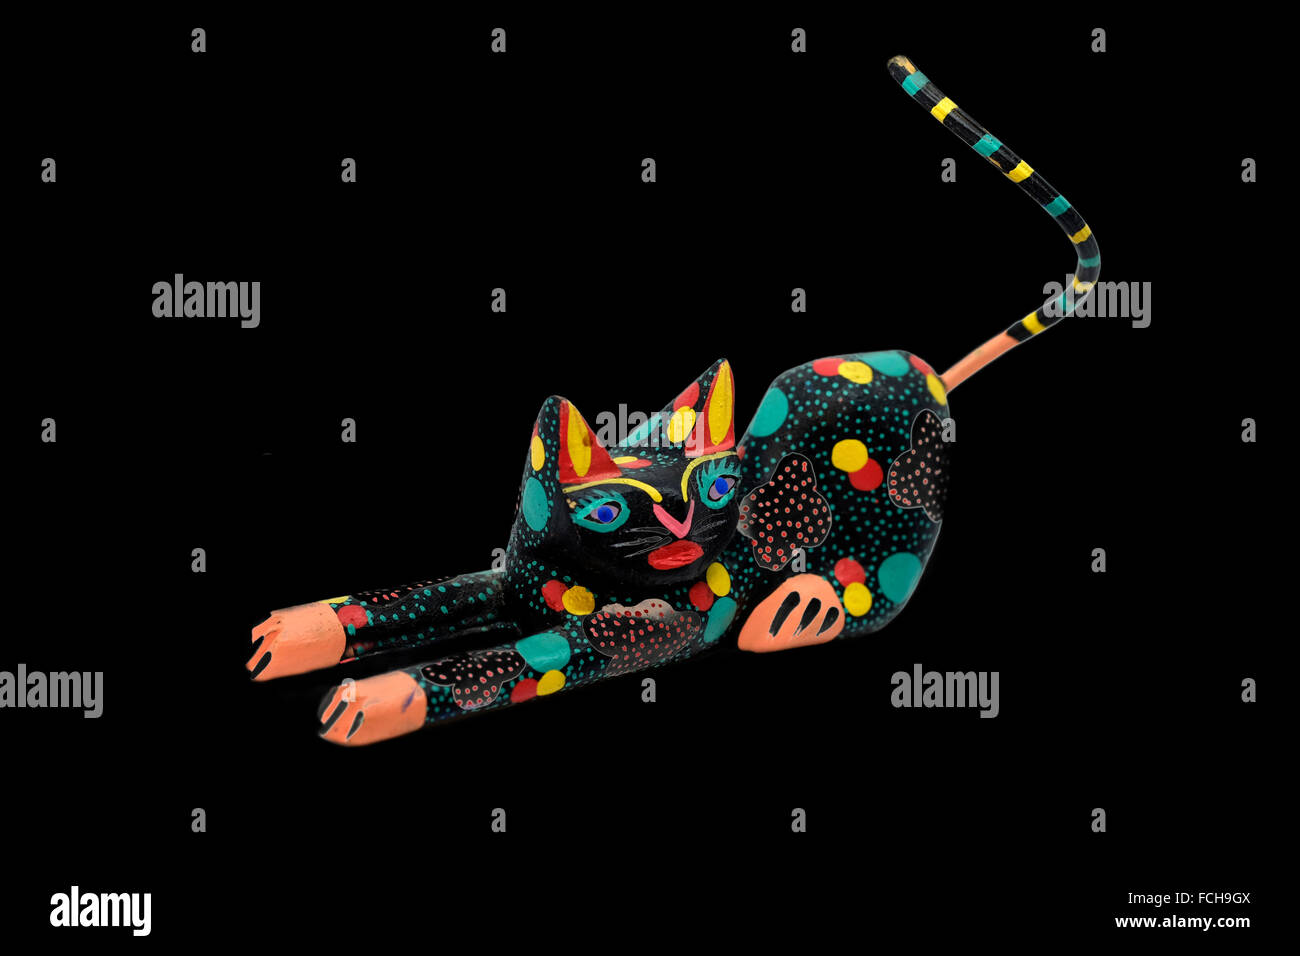 Mexican carved cat figurine ,highly stylized and colored, cut-out on a black background Stock Photo